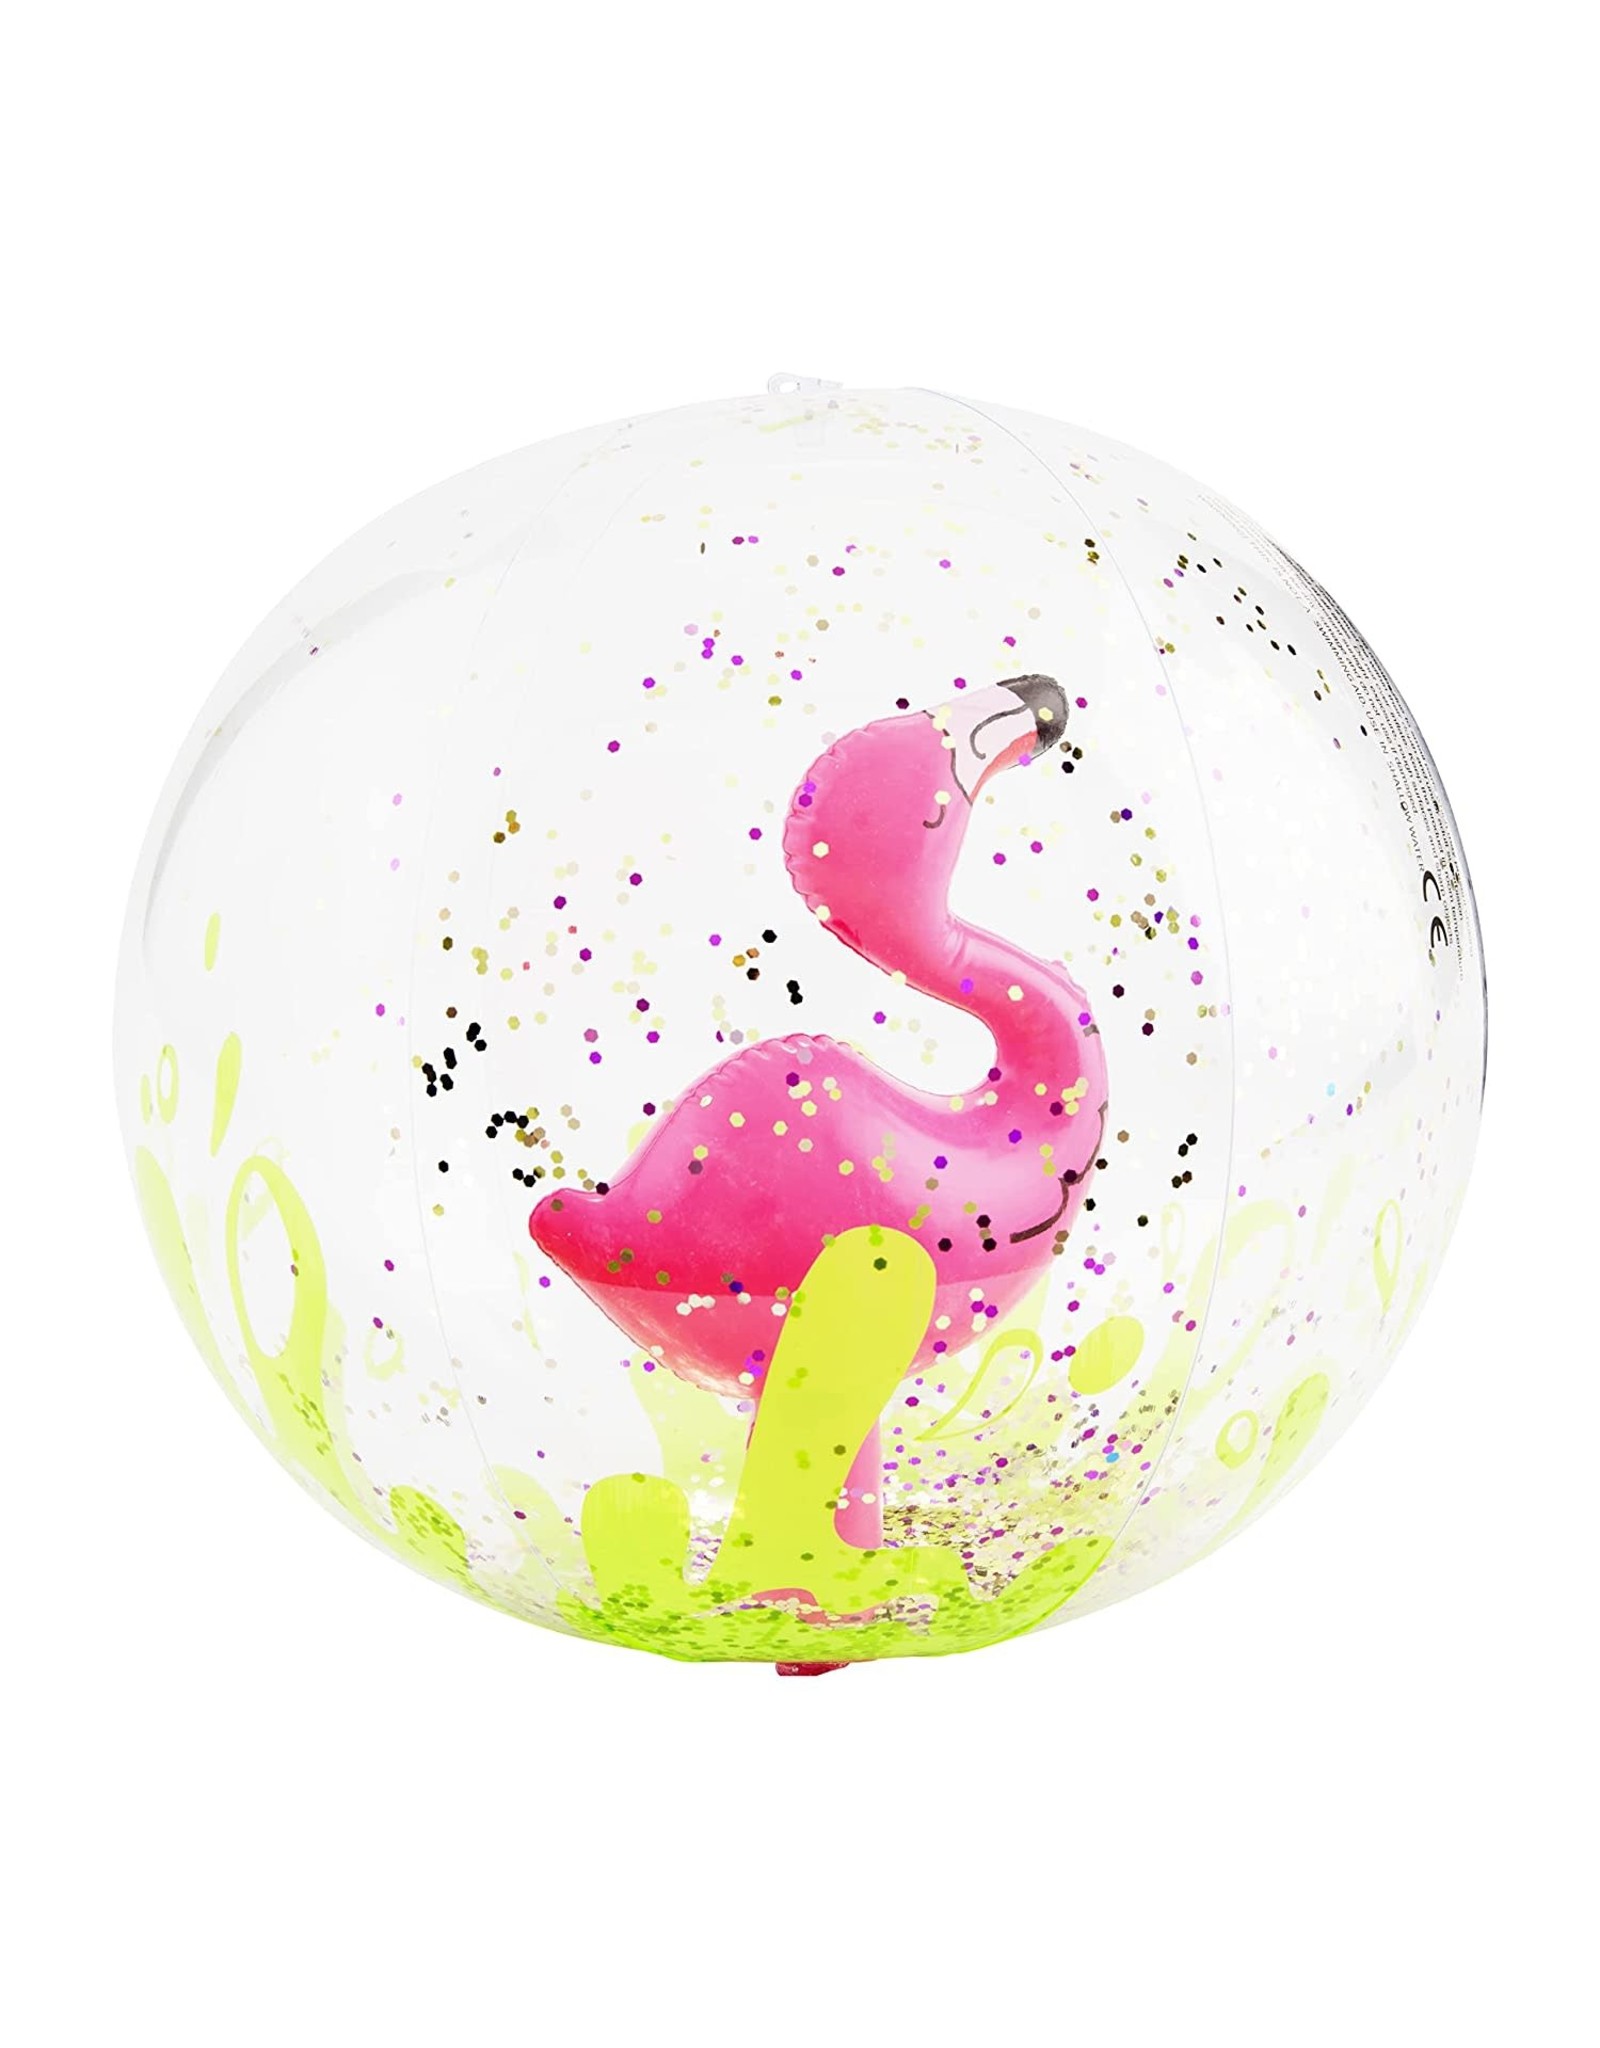 Mud Pie Kids Gifts Glitter Filled Flamingo Character Beach Ball 12in